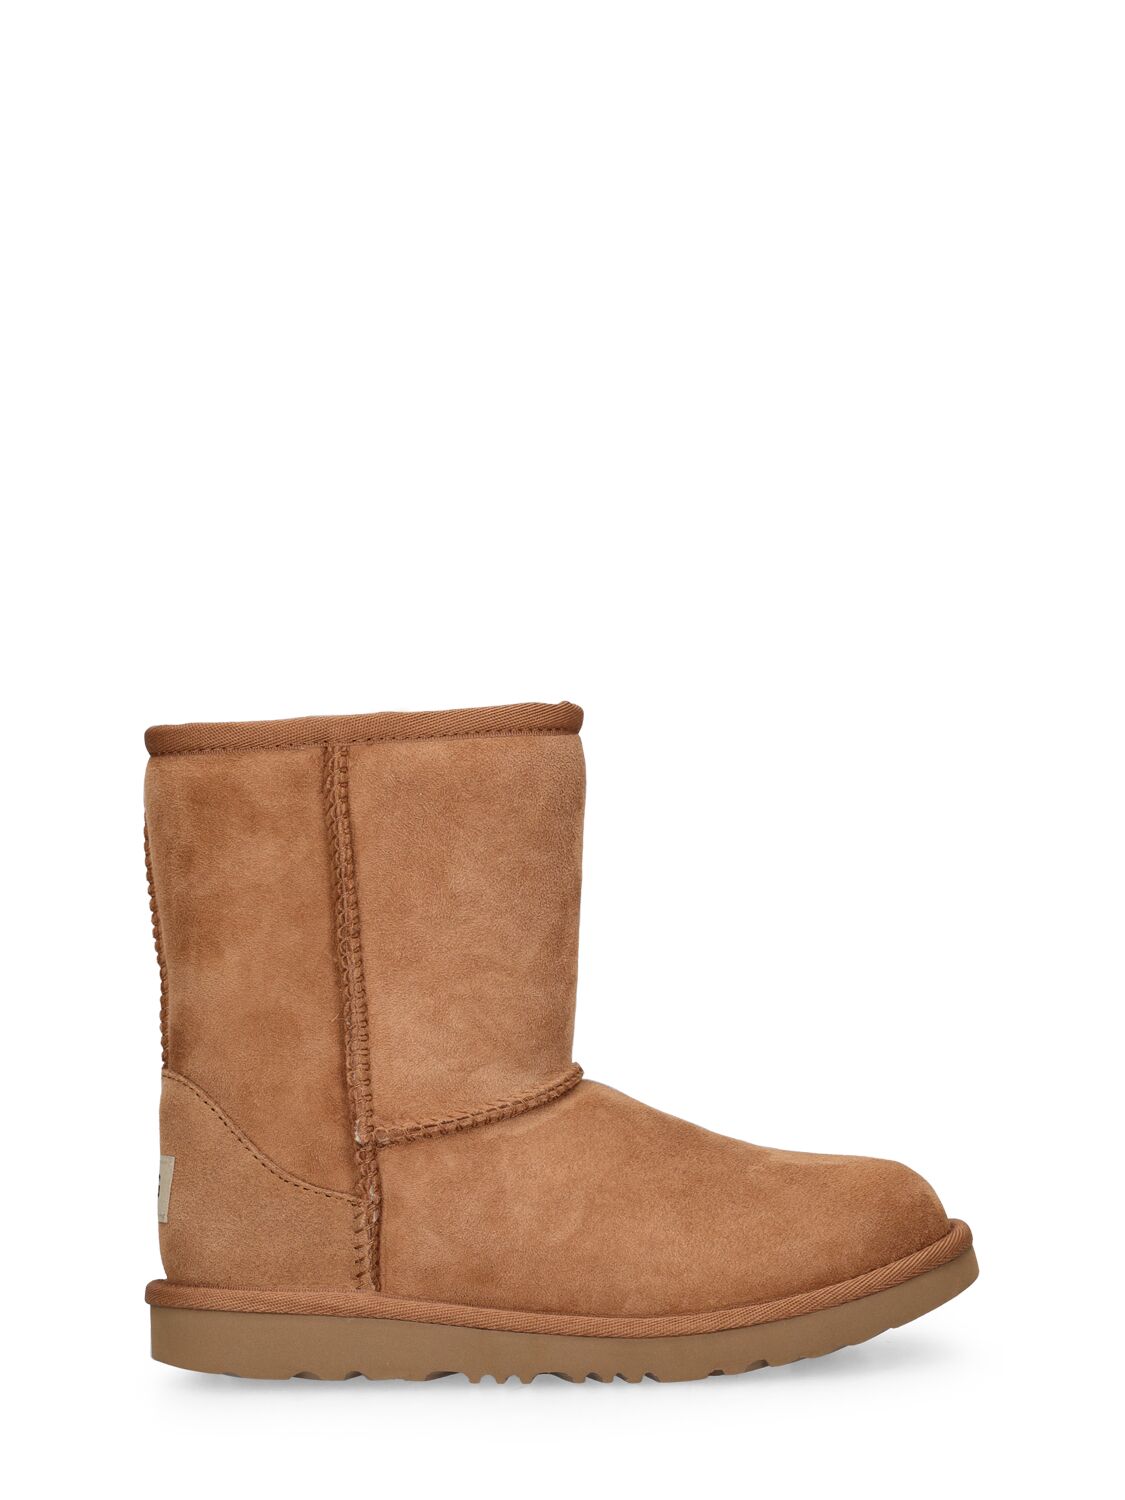 Image of Classic Ii Shearling Boots